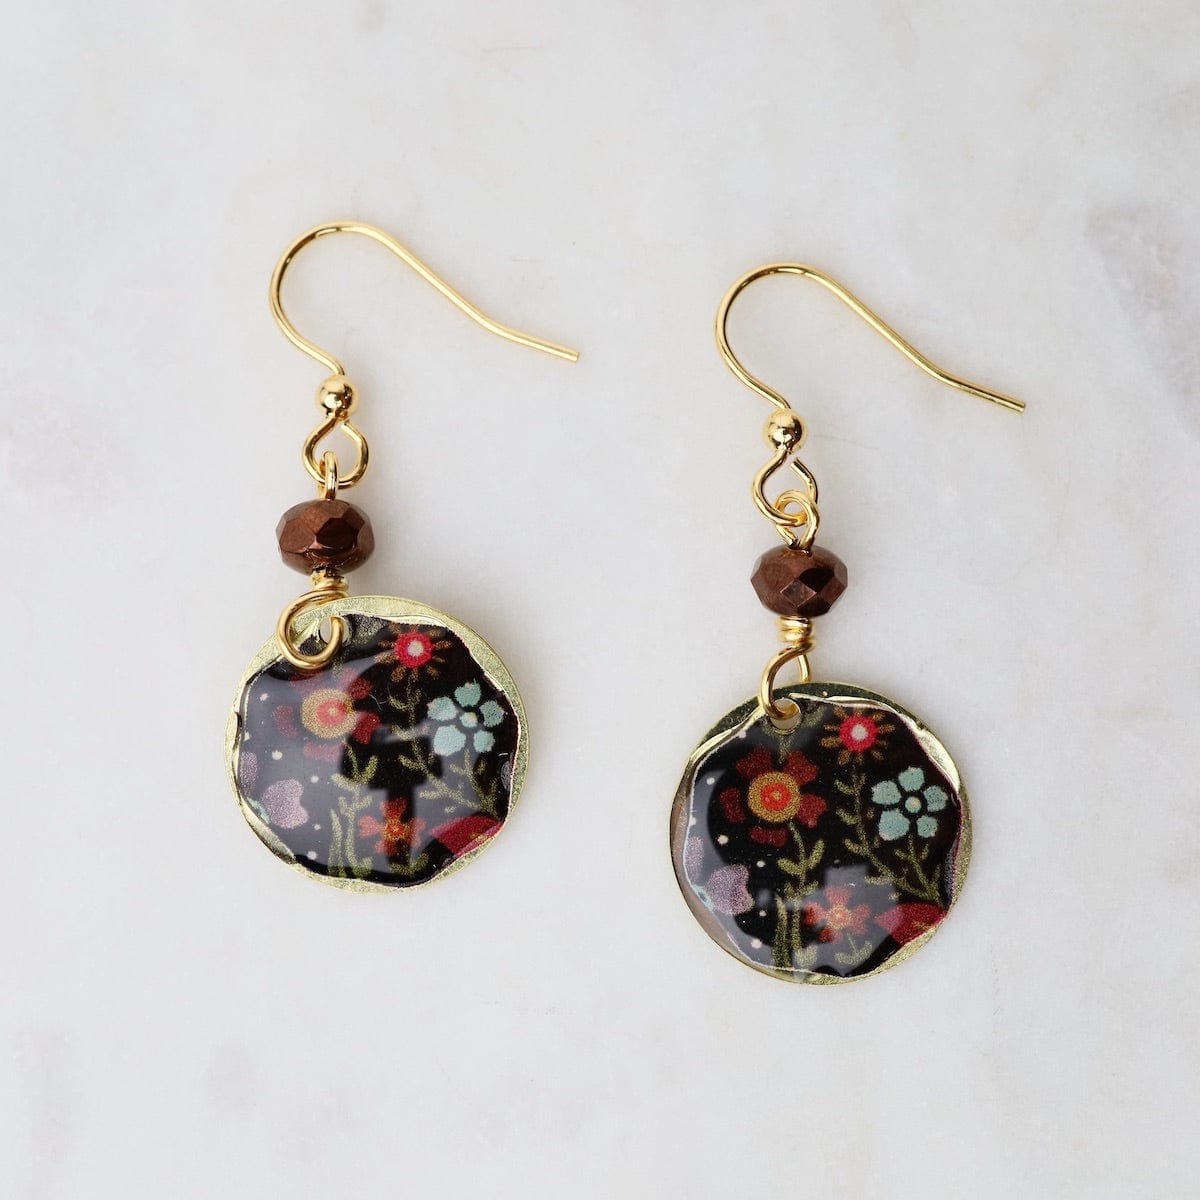 EAR-JM Round Forest Flowers Earrings with Beads